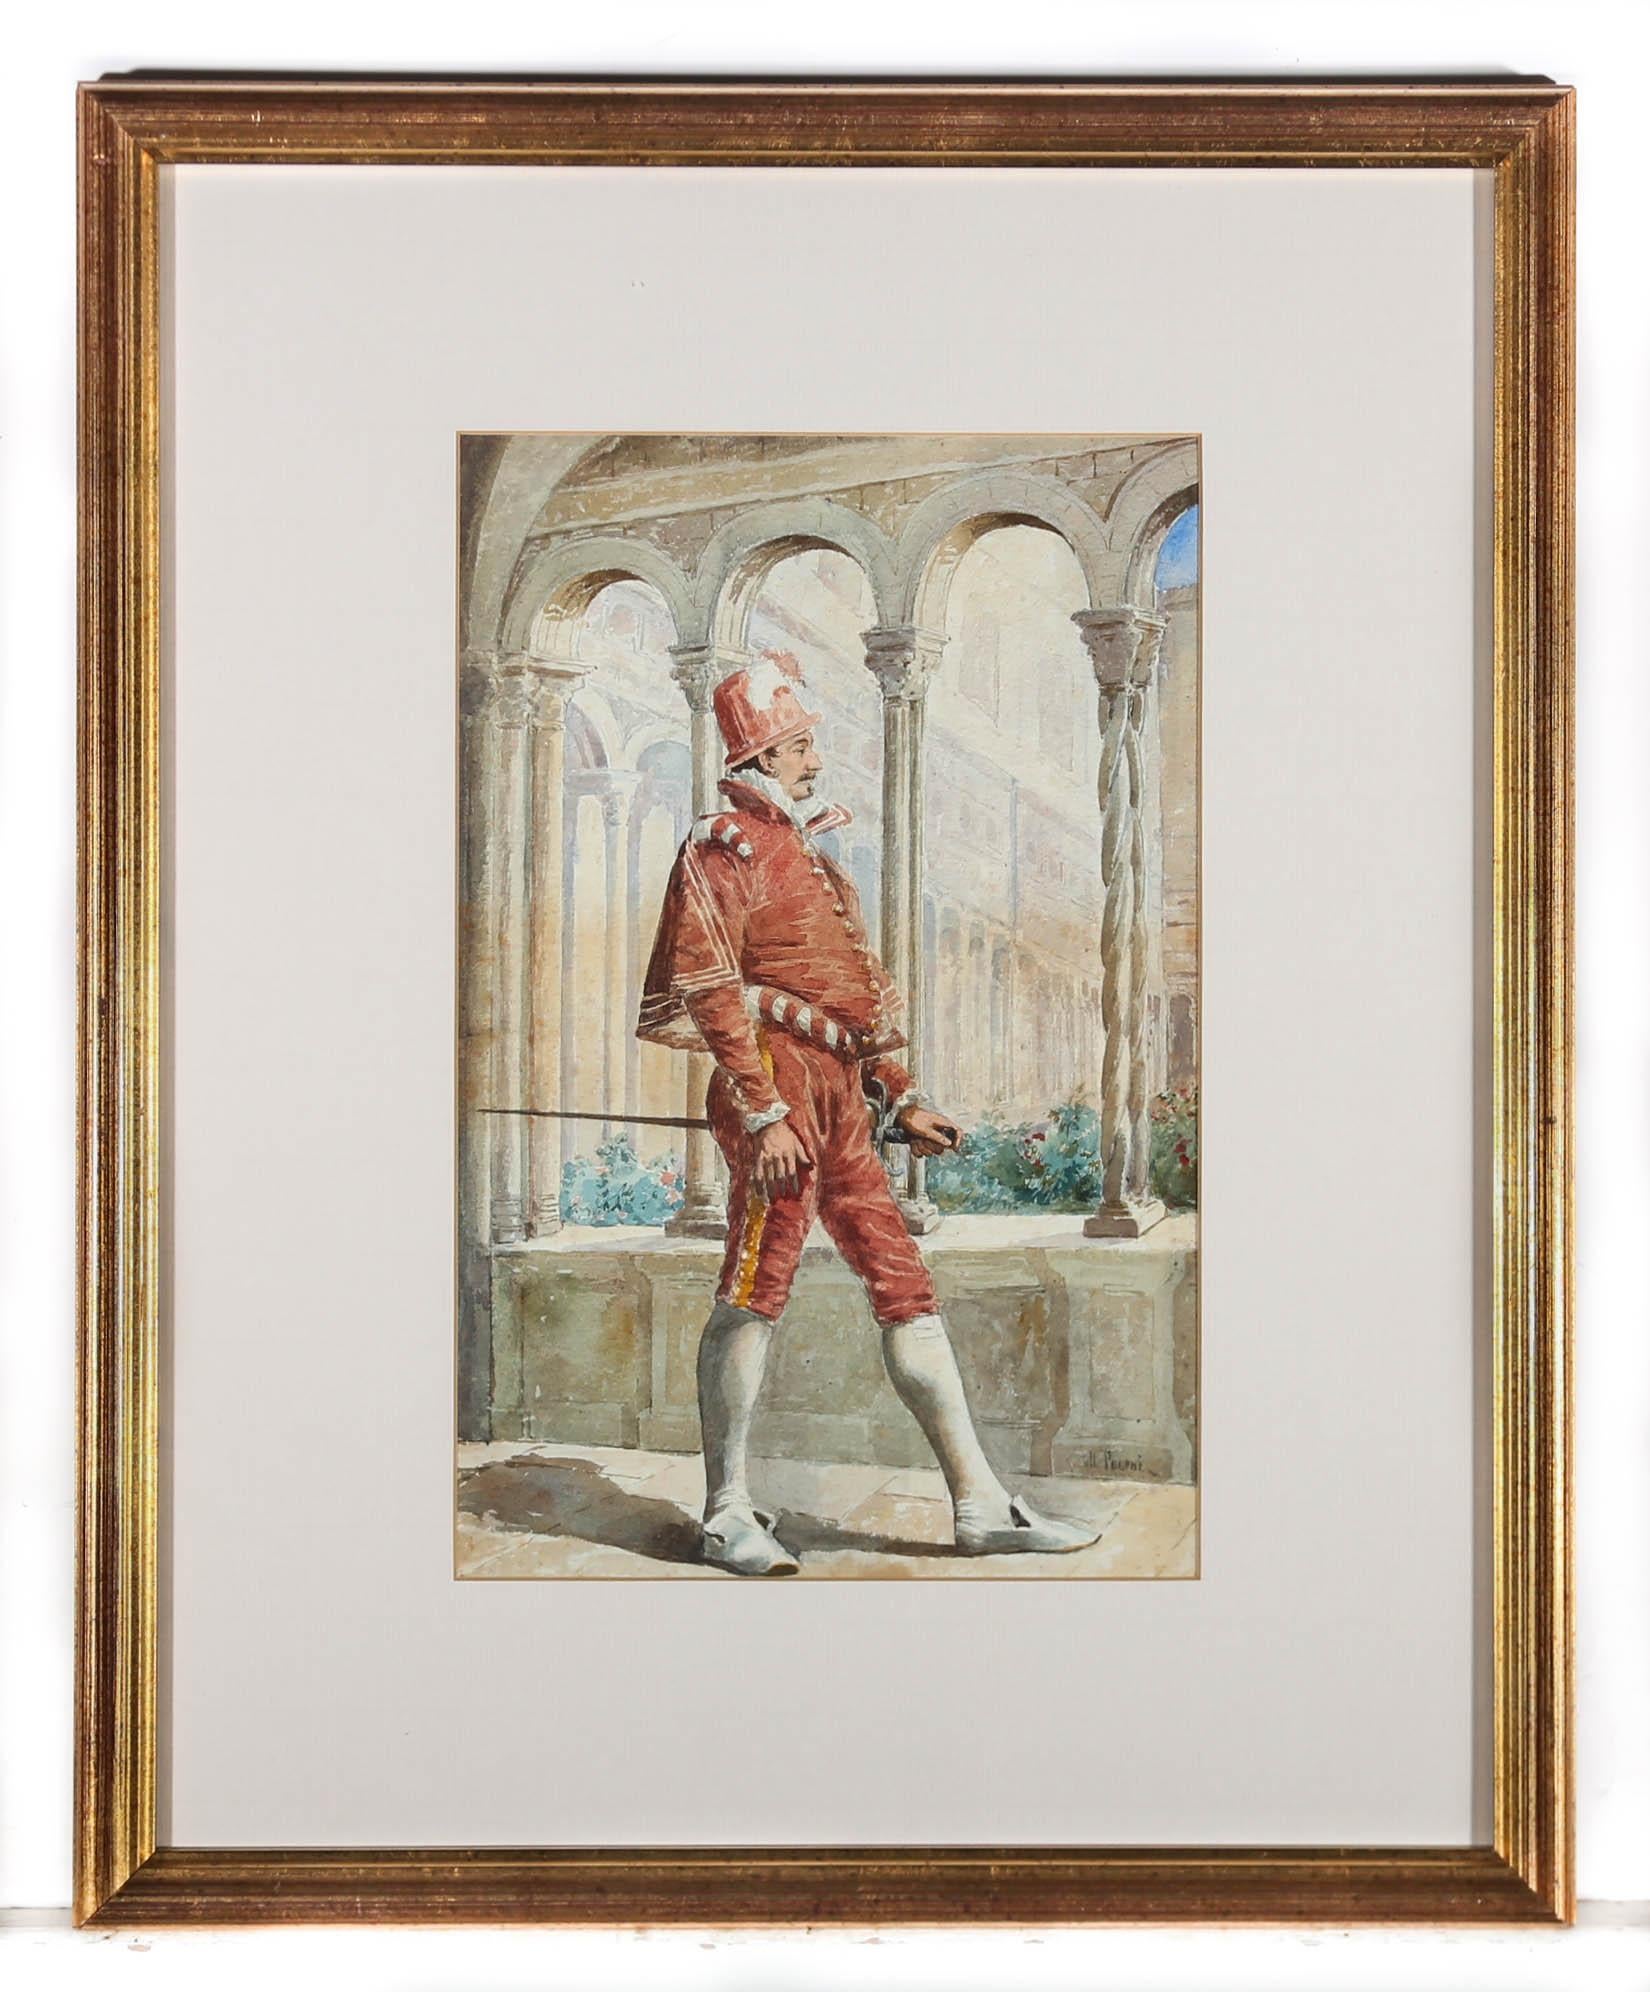 A fine 19th century watercolour of a noble cavalier walking the cloisters at court. The artist has caught the gallant figure dressed in red, clutching a sword in his left hand. Indistinctly signed to the lower right. Presented in a new card mount